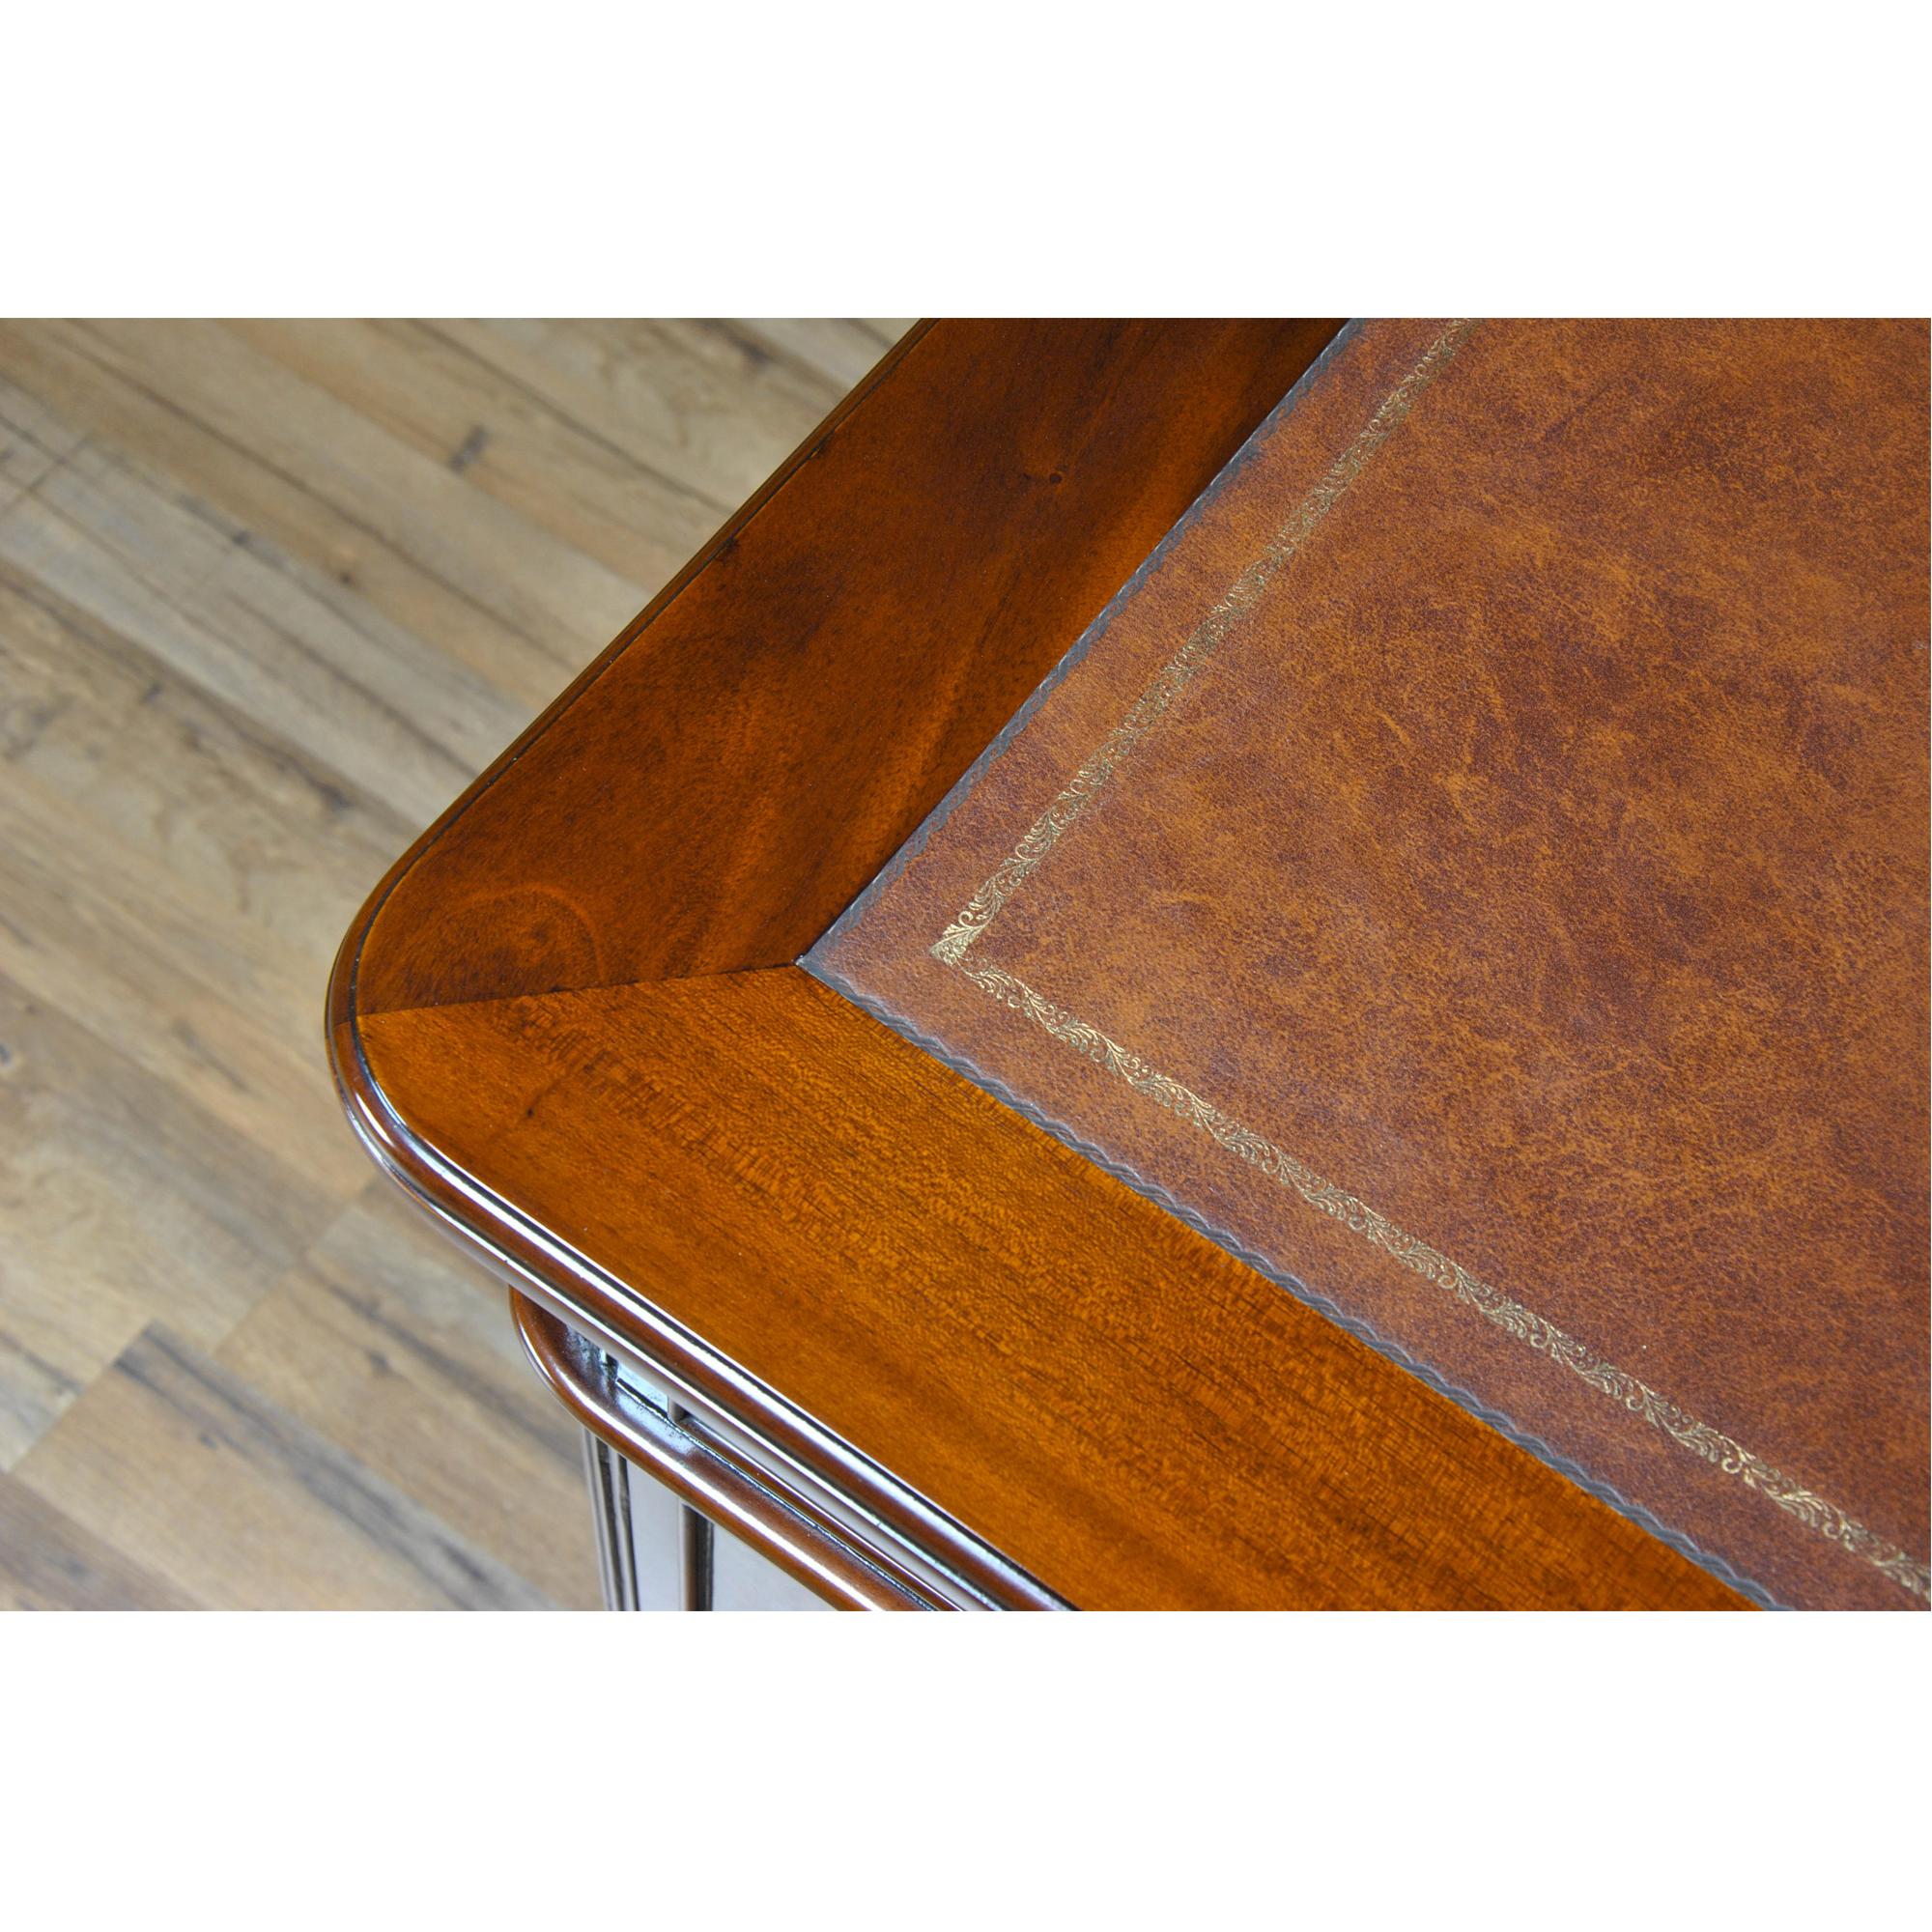 Mahogany Partners Desk In New Condition For Sale In Annville, PA